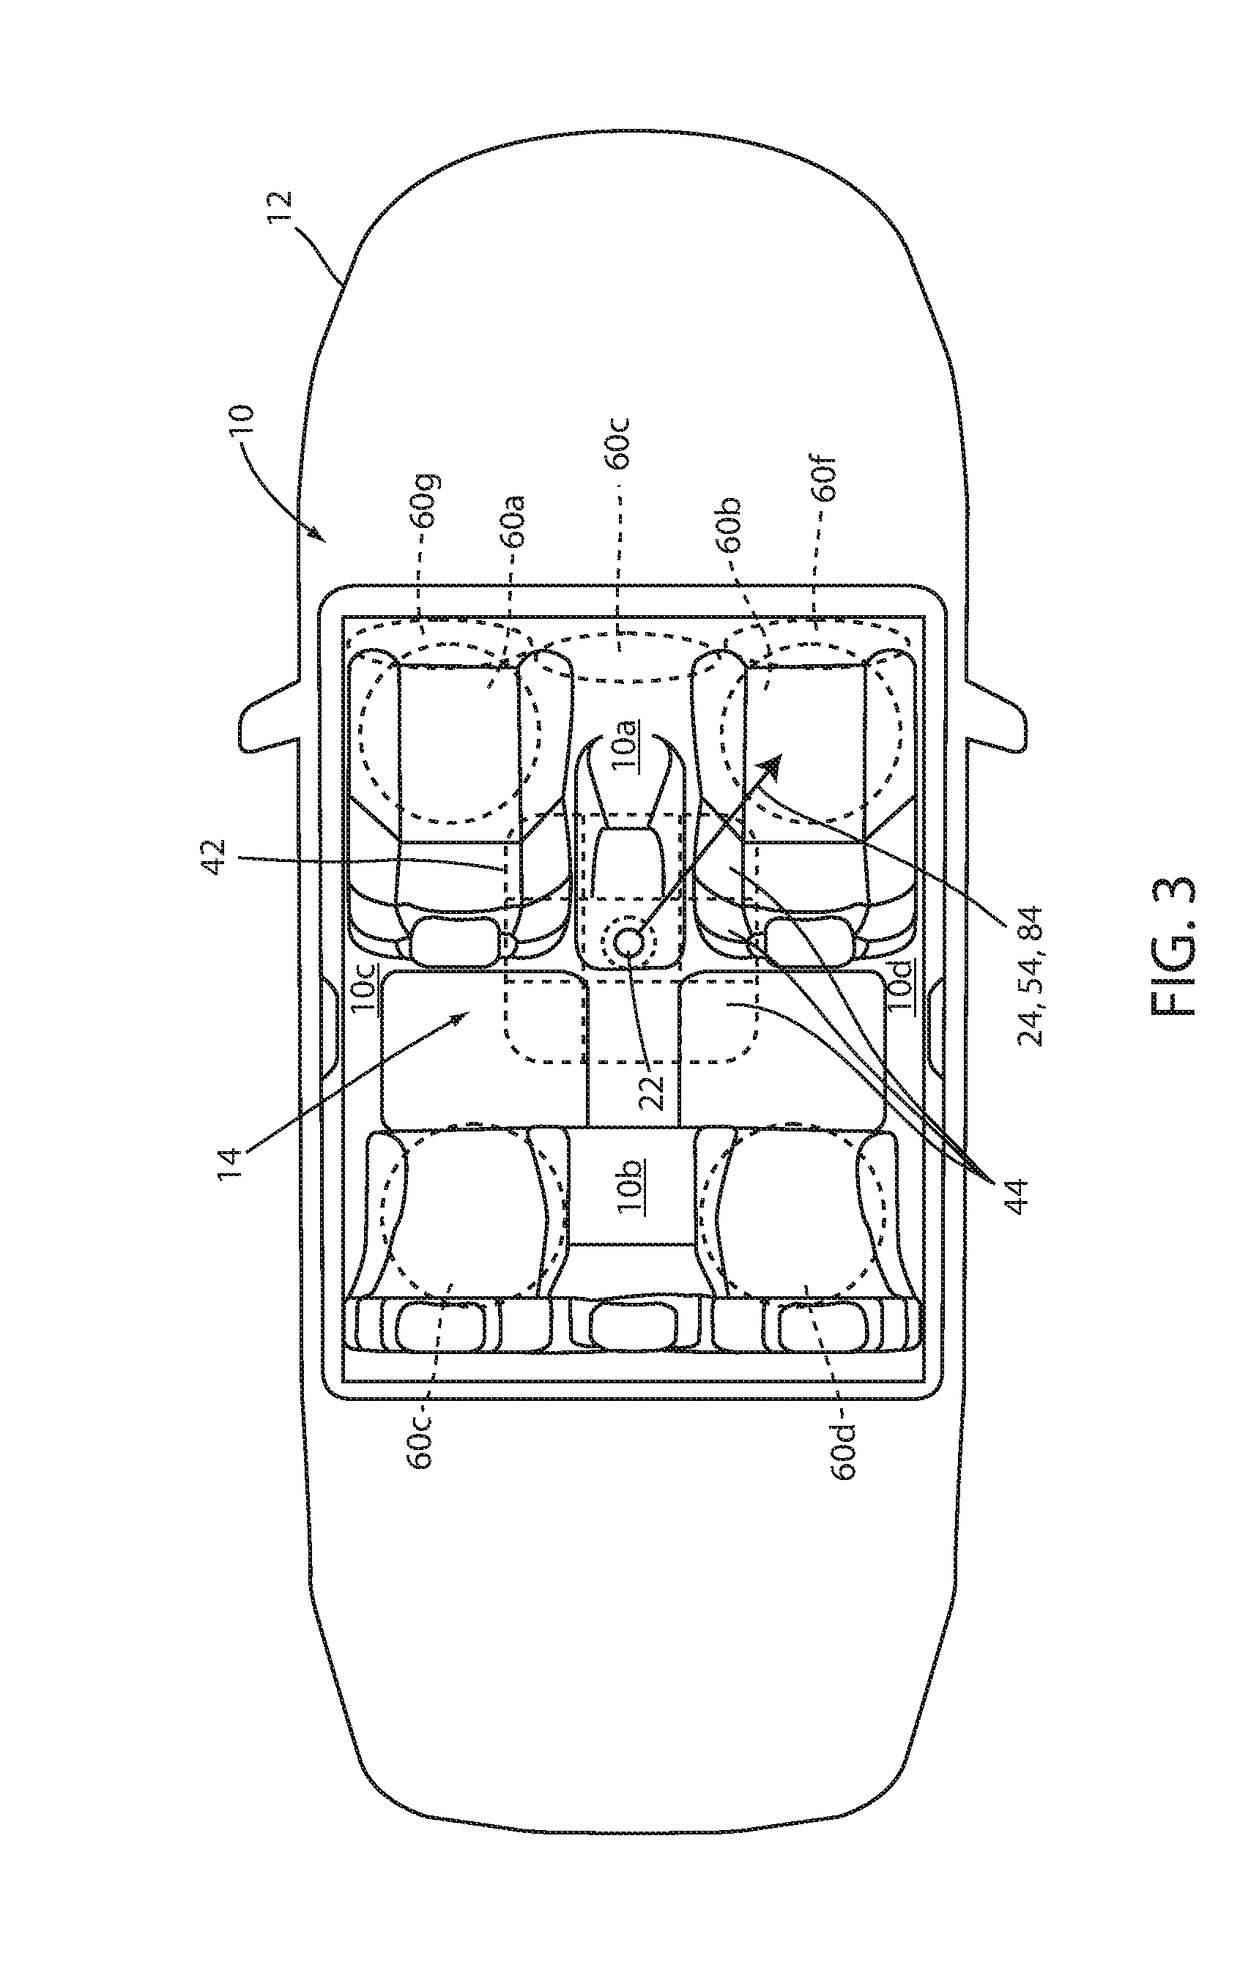 Vehicle lighting system with directional control